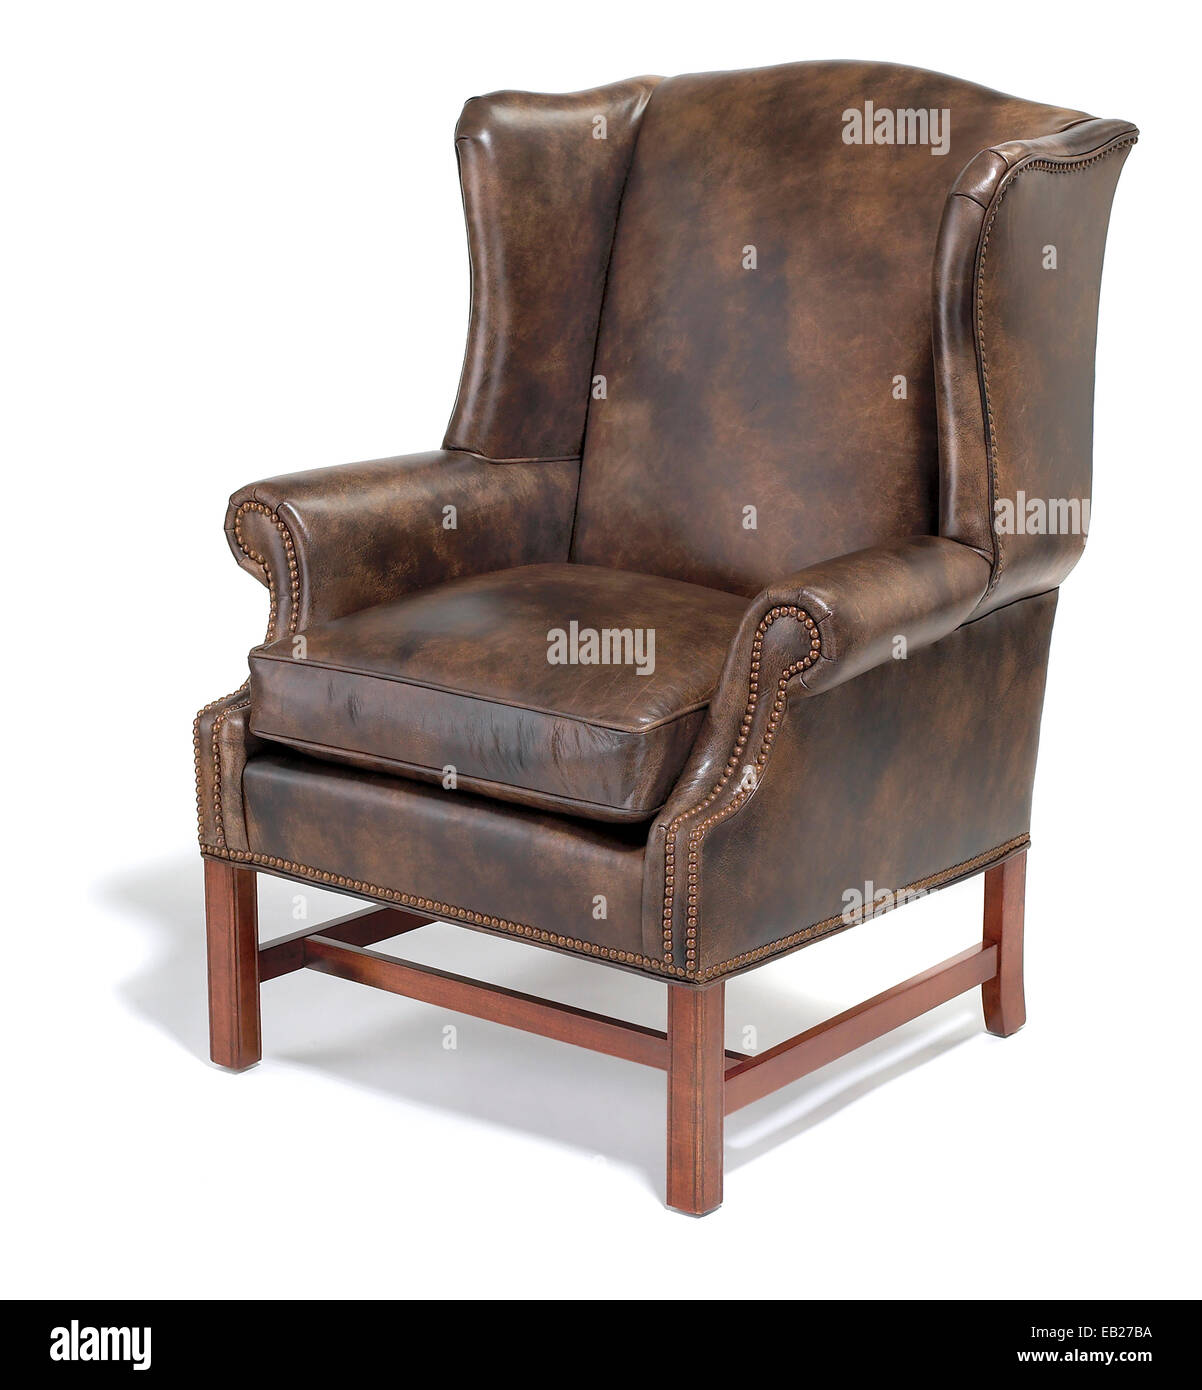 brown leather wing chair Stock Photo